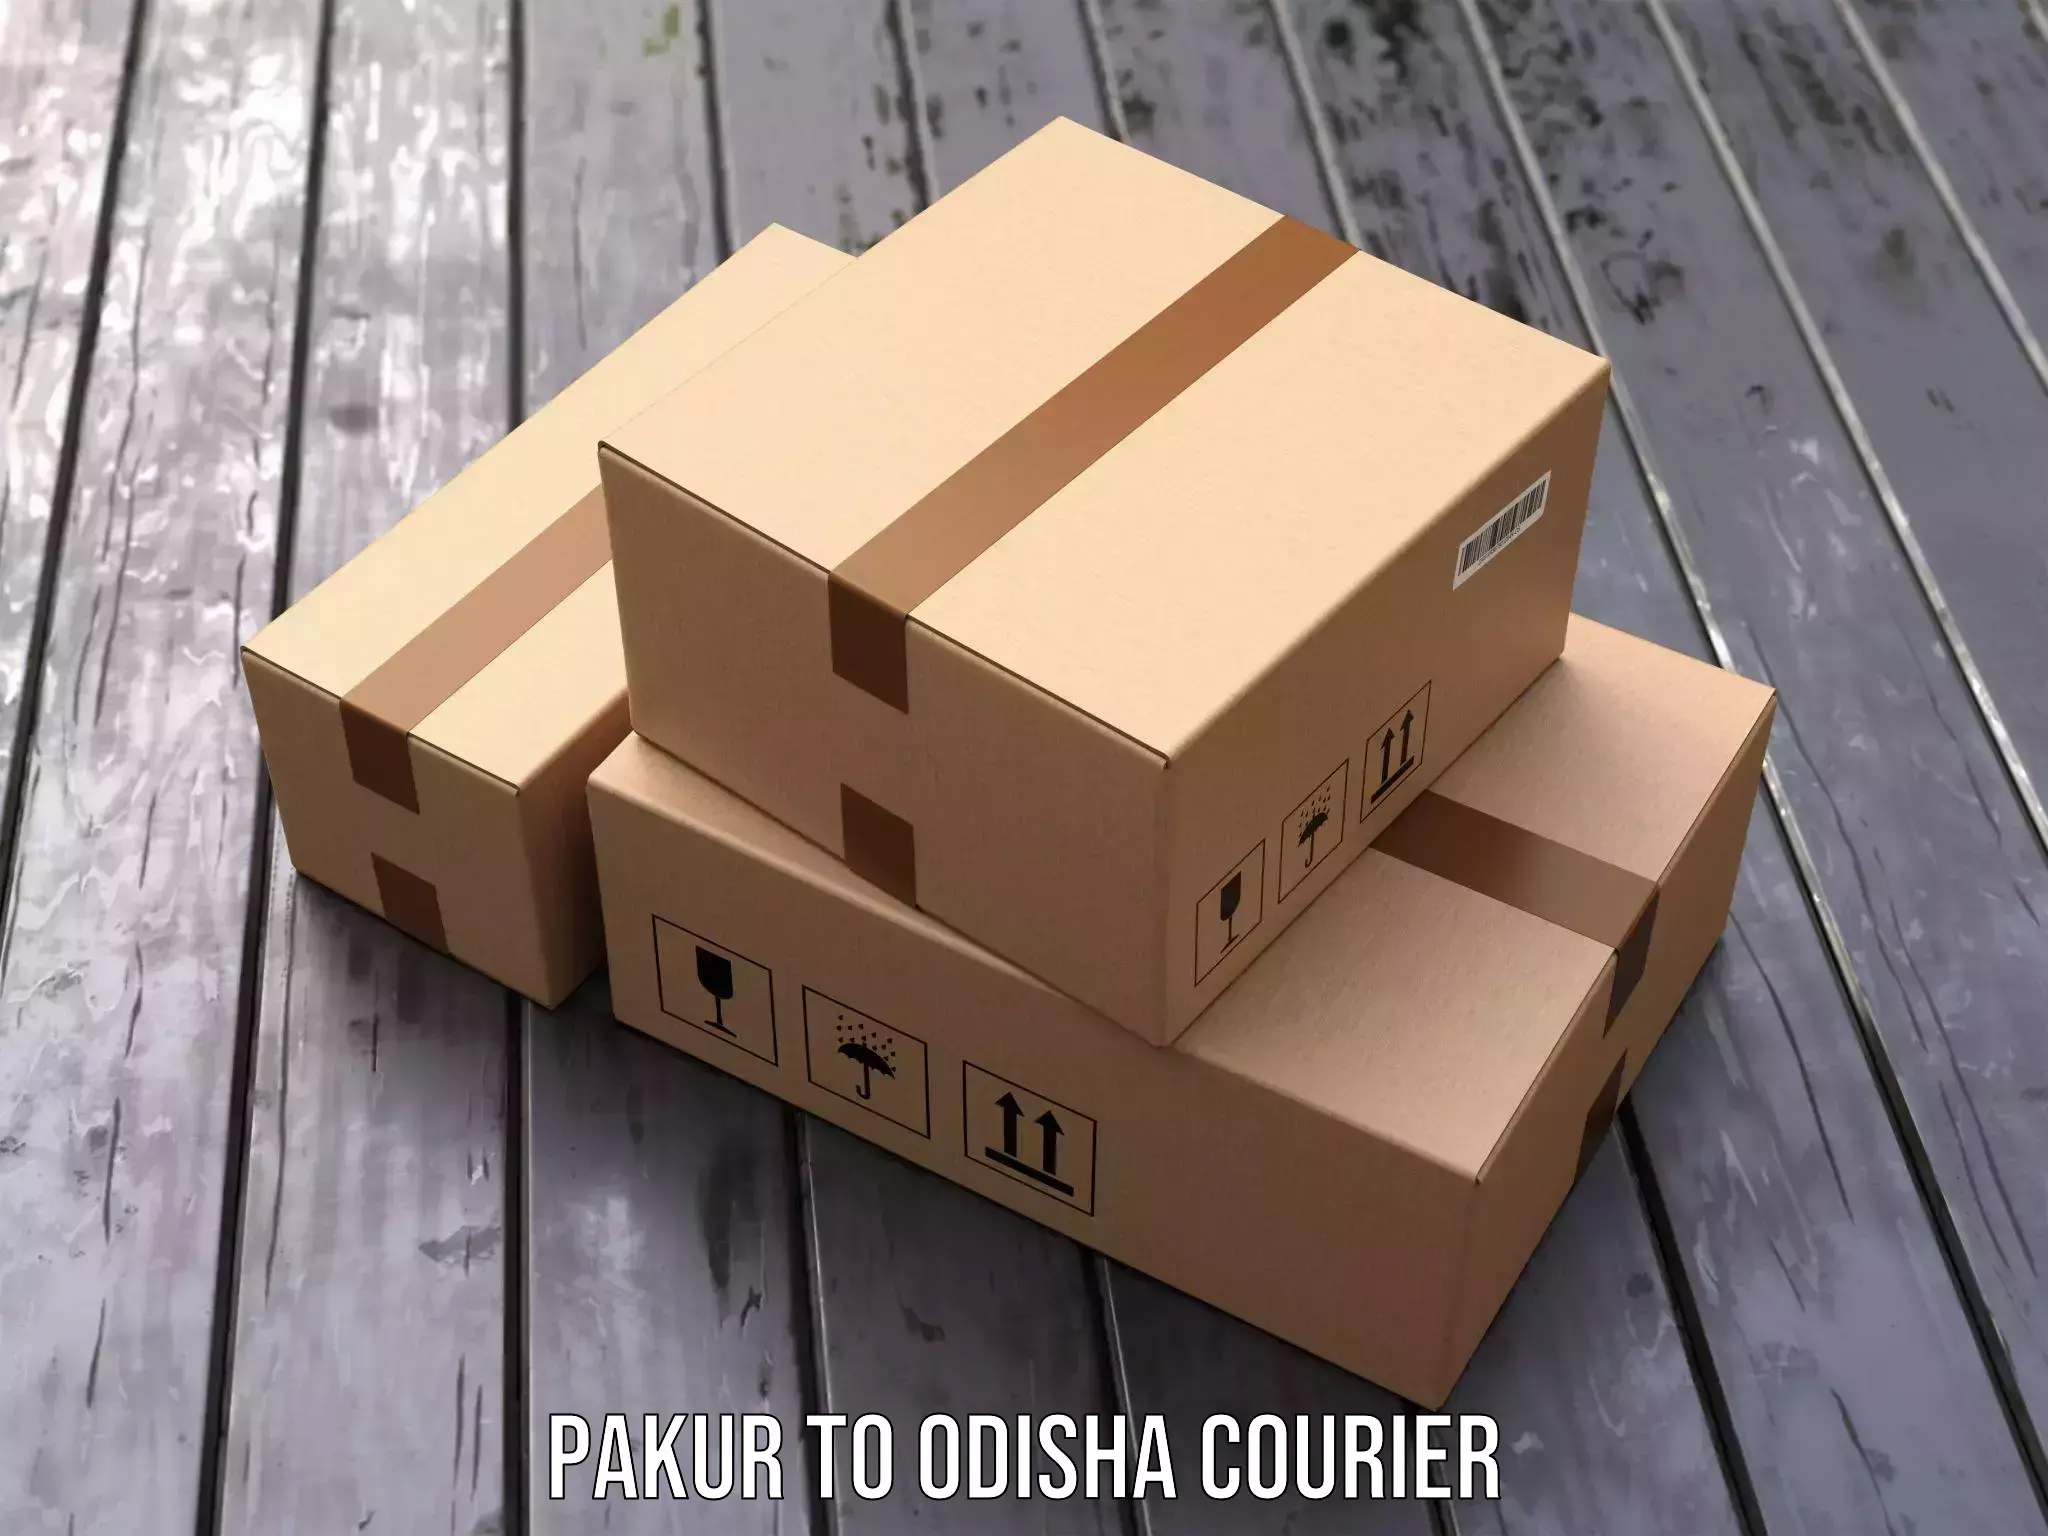 Next-day delivery options Pakur to Sohela